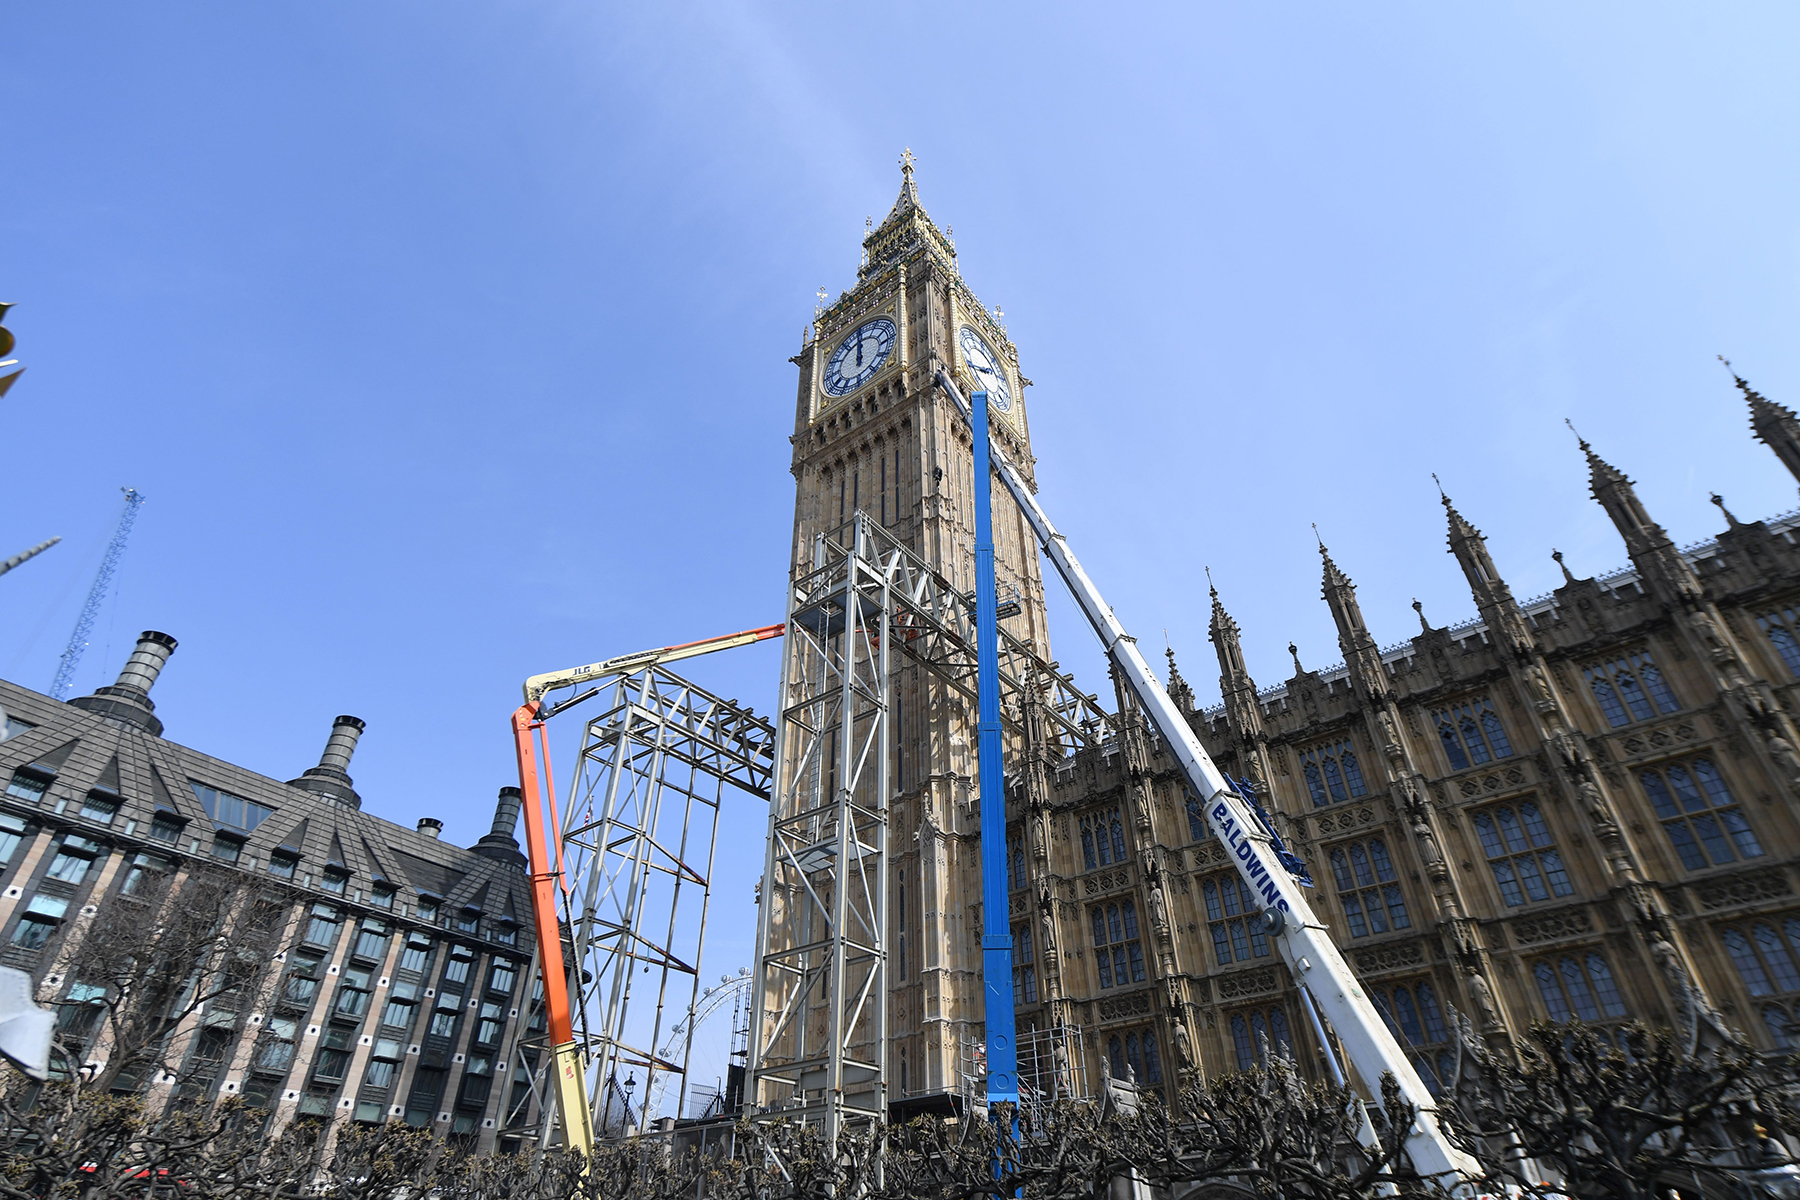 Scaffolding erected around the tower during refurbishment work had to be carefully positioned to accommodate structural and security concerns. (©UK Parliament, Jessica Taylor)